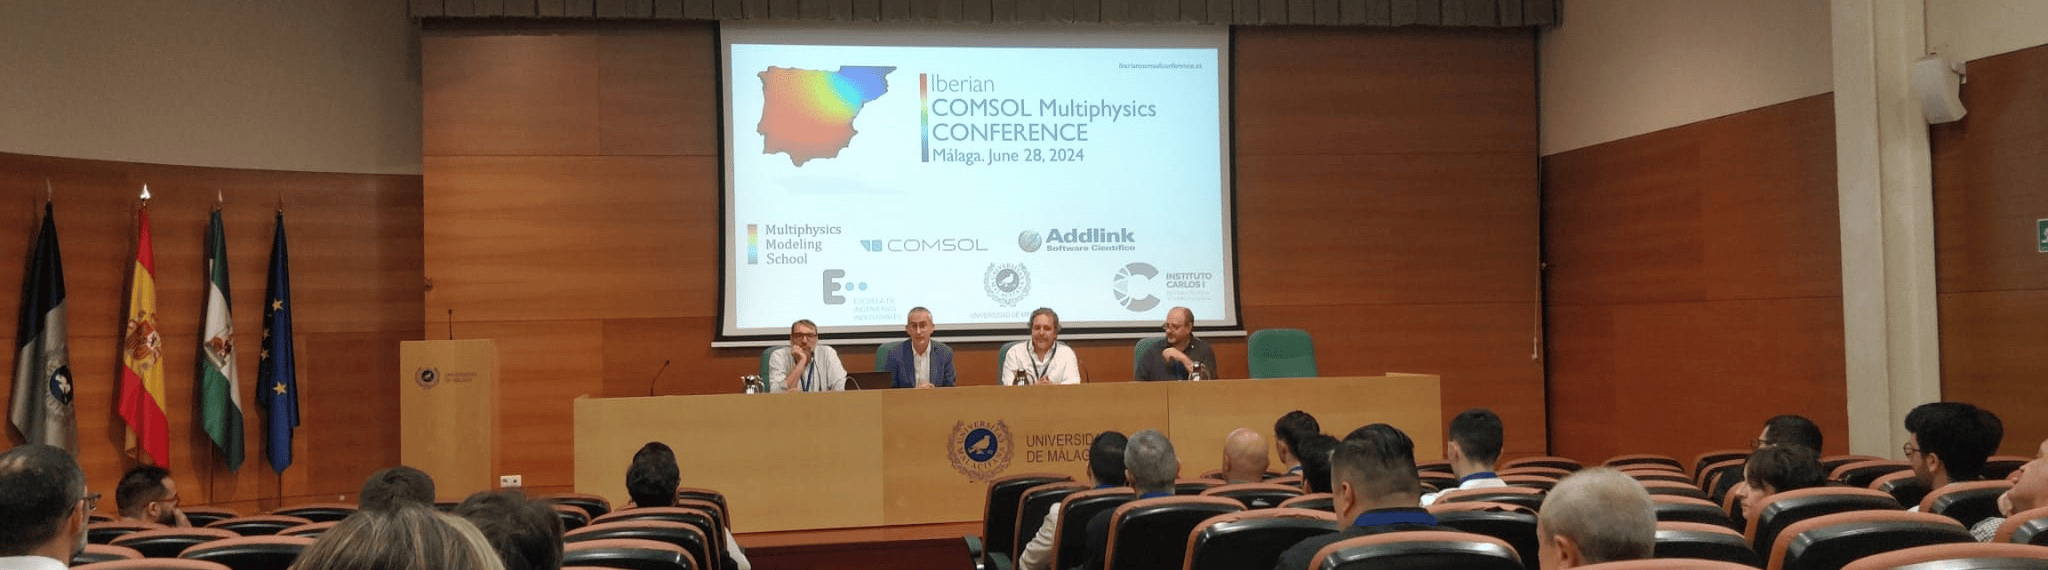 Inauguración Iberian COMSOL Multiphysics Conference 2024